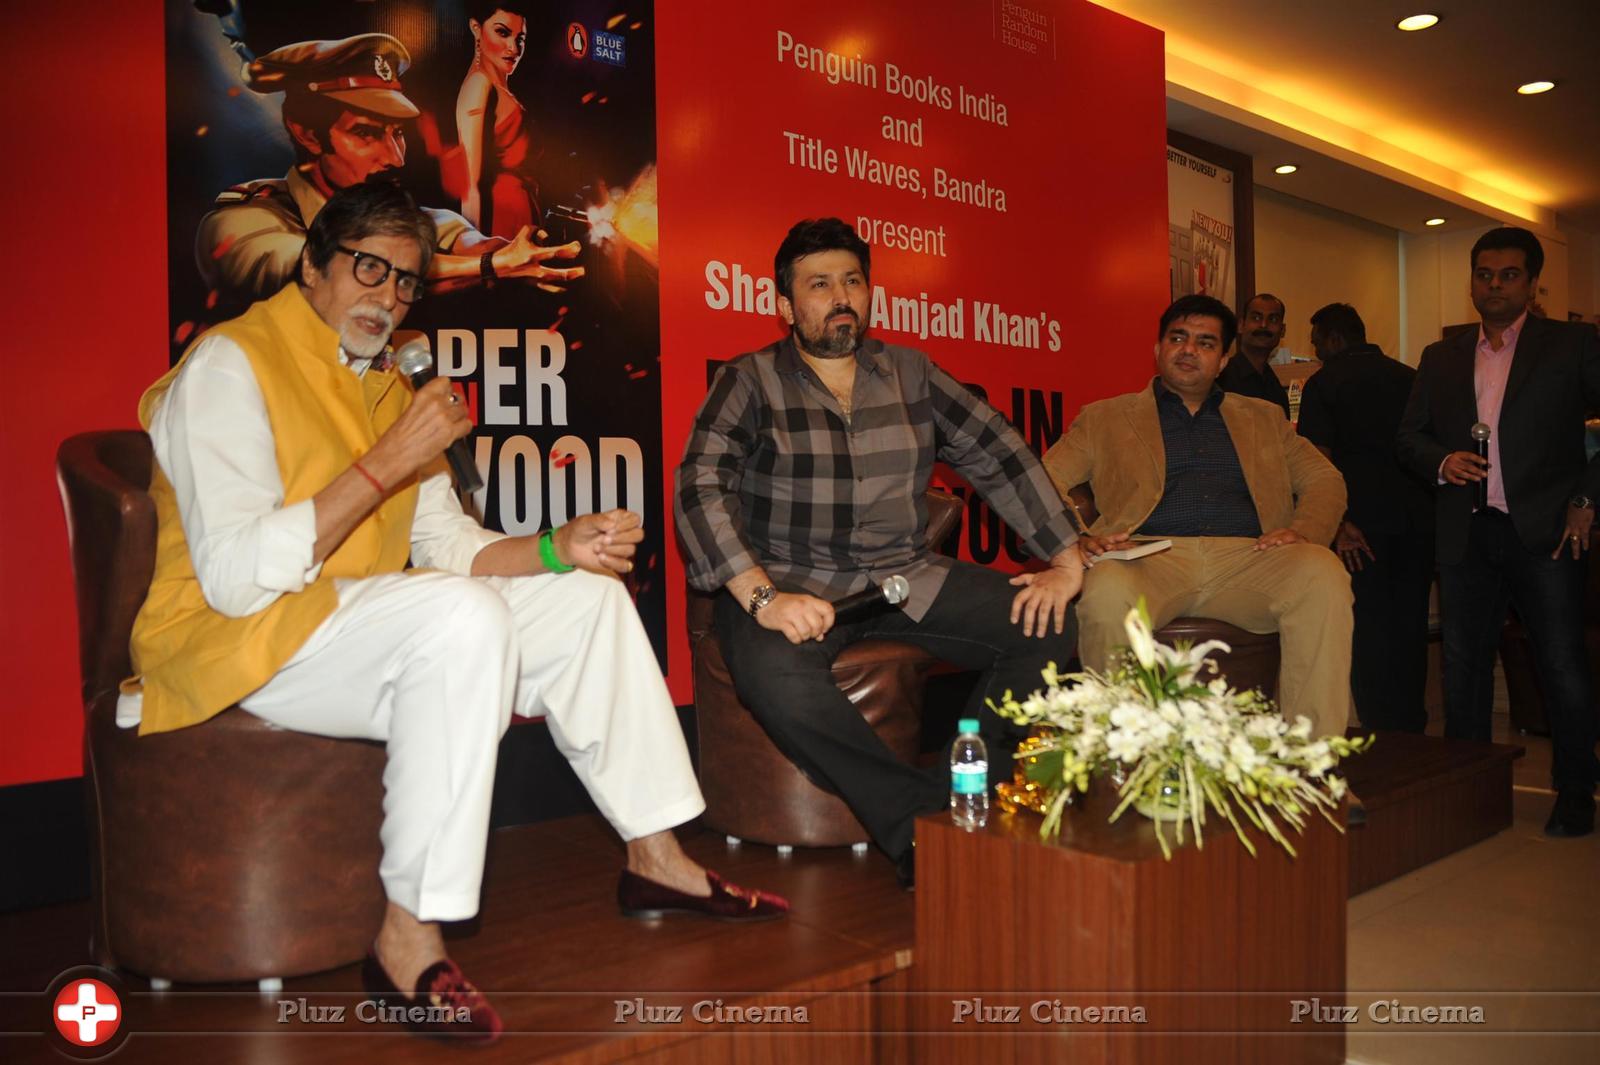 Amitabh Bachchan launches Shadab Amjad Khan's book Murder in Bollywood Photos | Picture 1062809